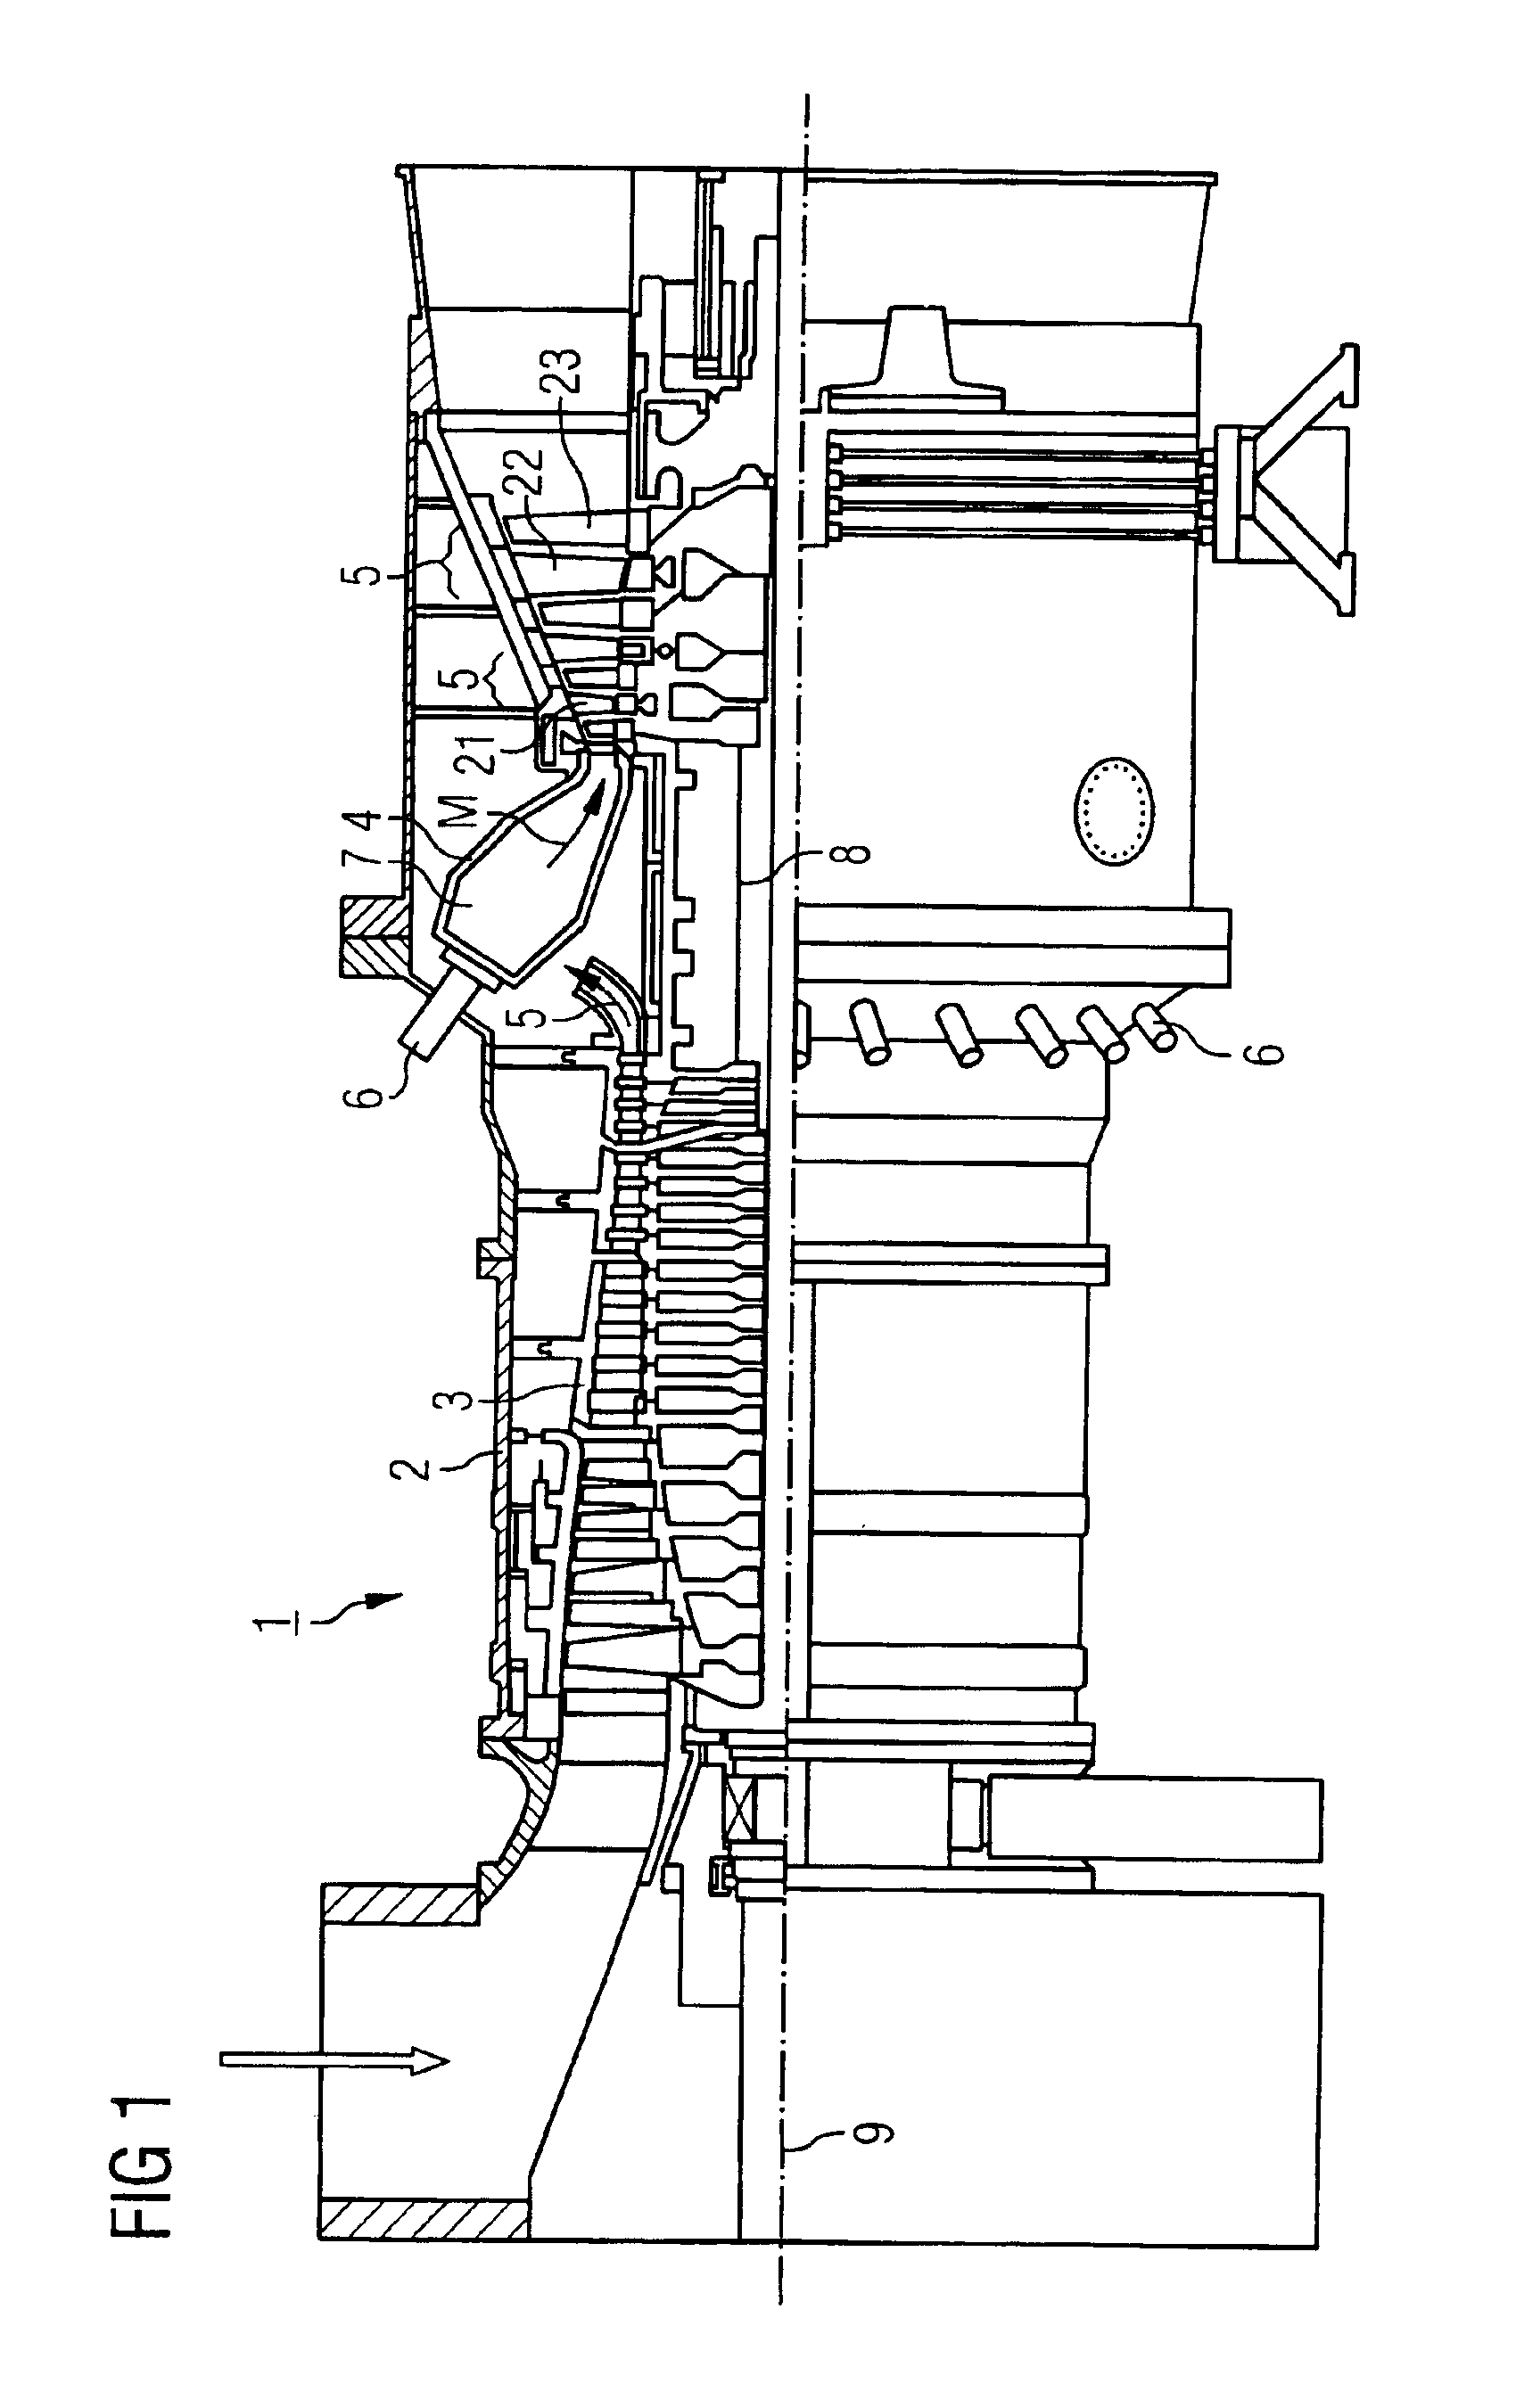 Annular combustion chambers for a gas turbine and gas turbine